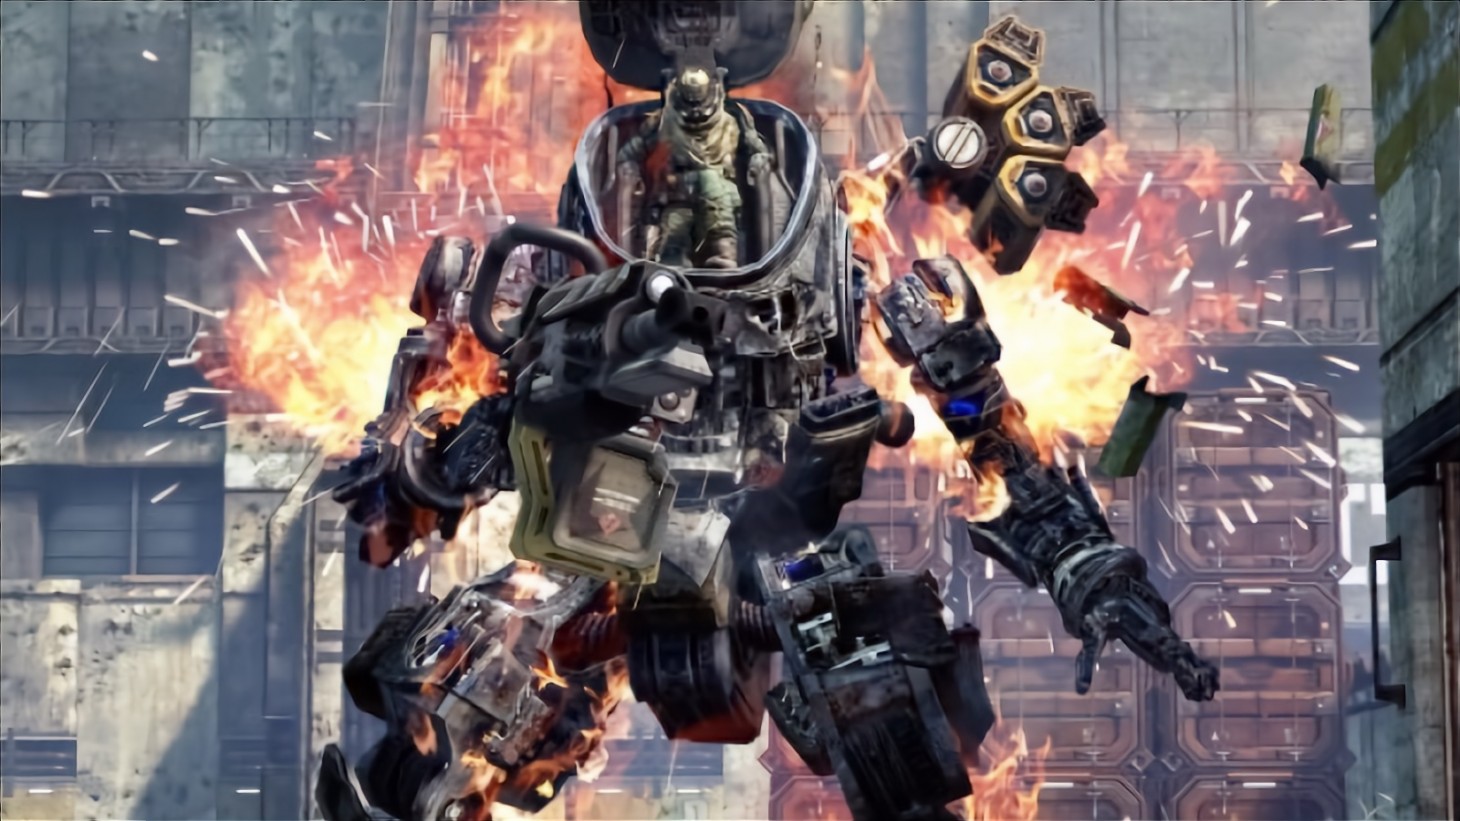 The world thinks we're making Titanfall 3 and we're not - this is